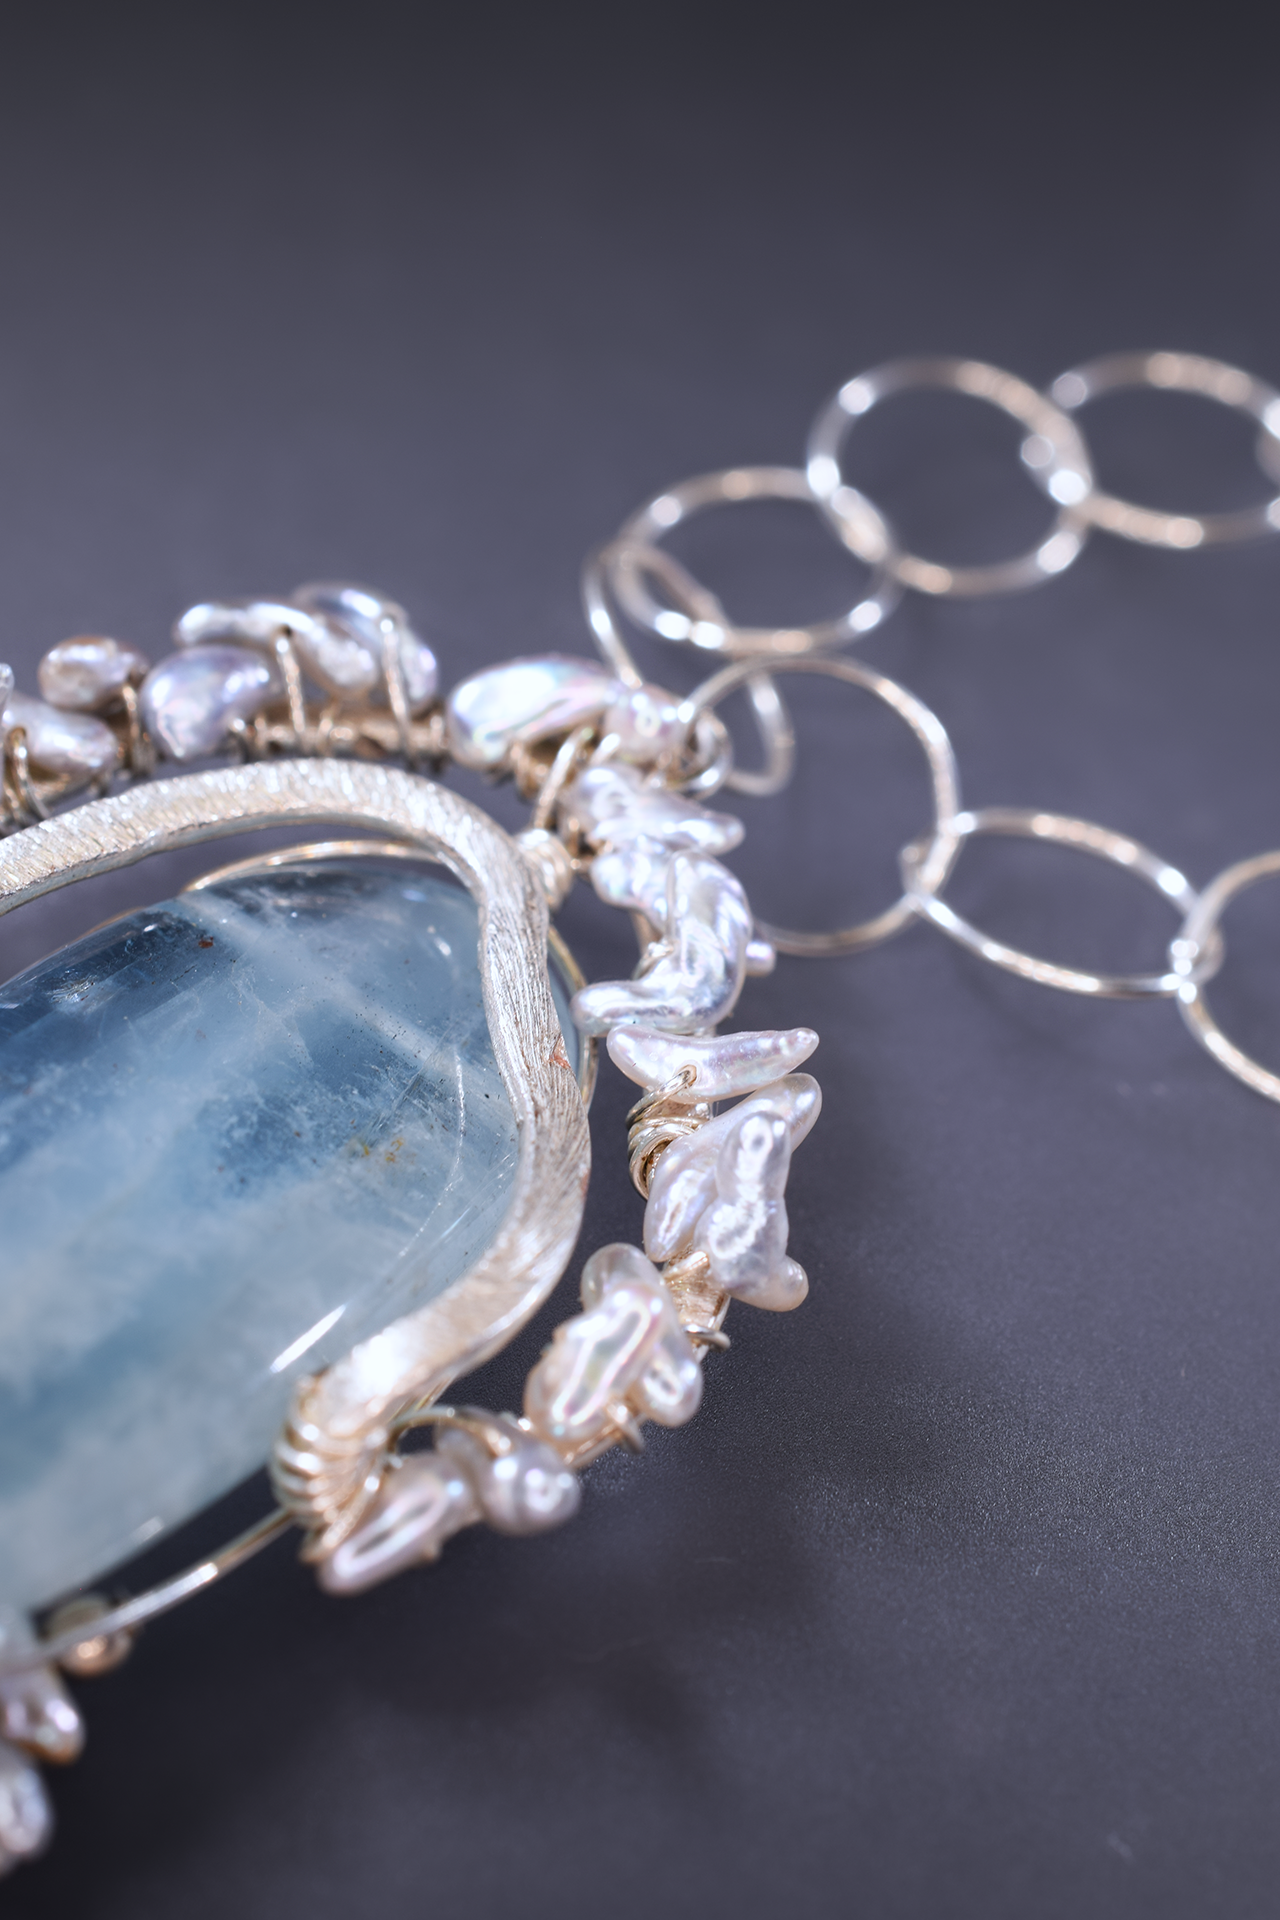 aquamarine pendant with keshi pearls and sterling silver